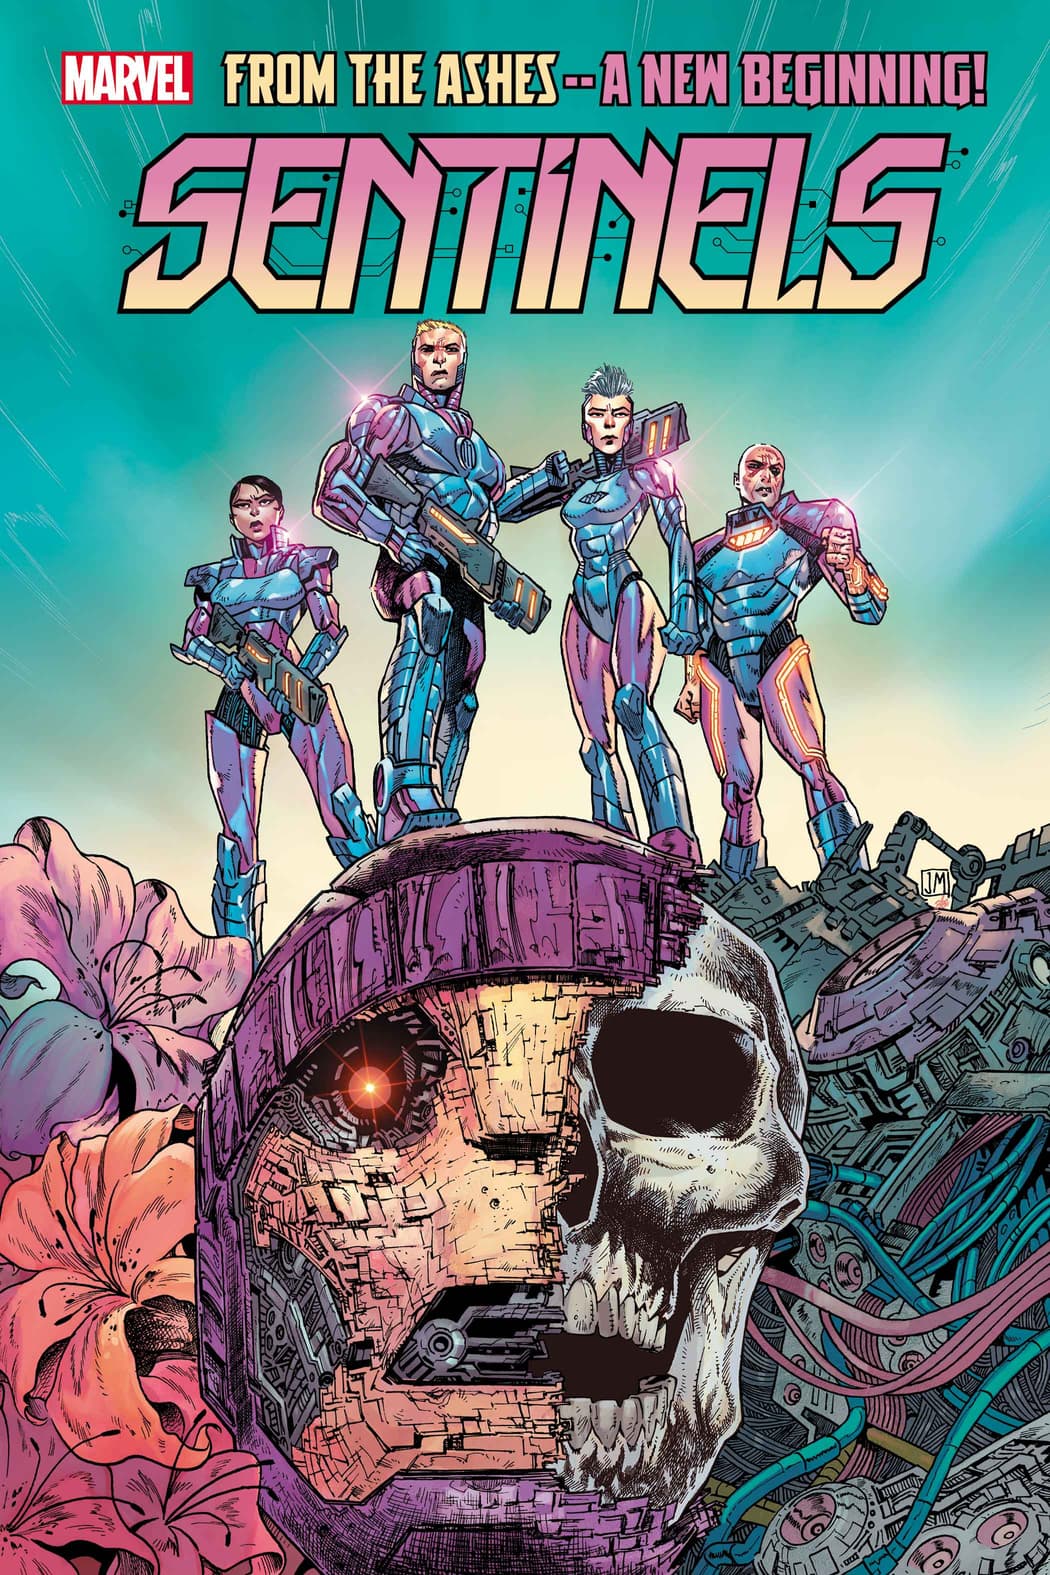 SENTINELS #1 cover by Justin Mason